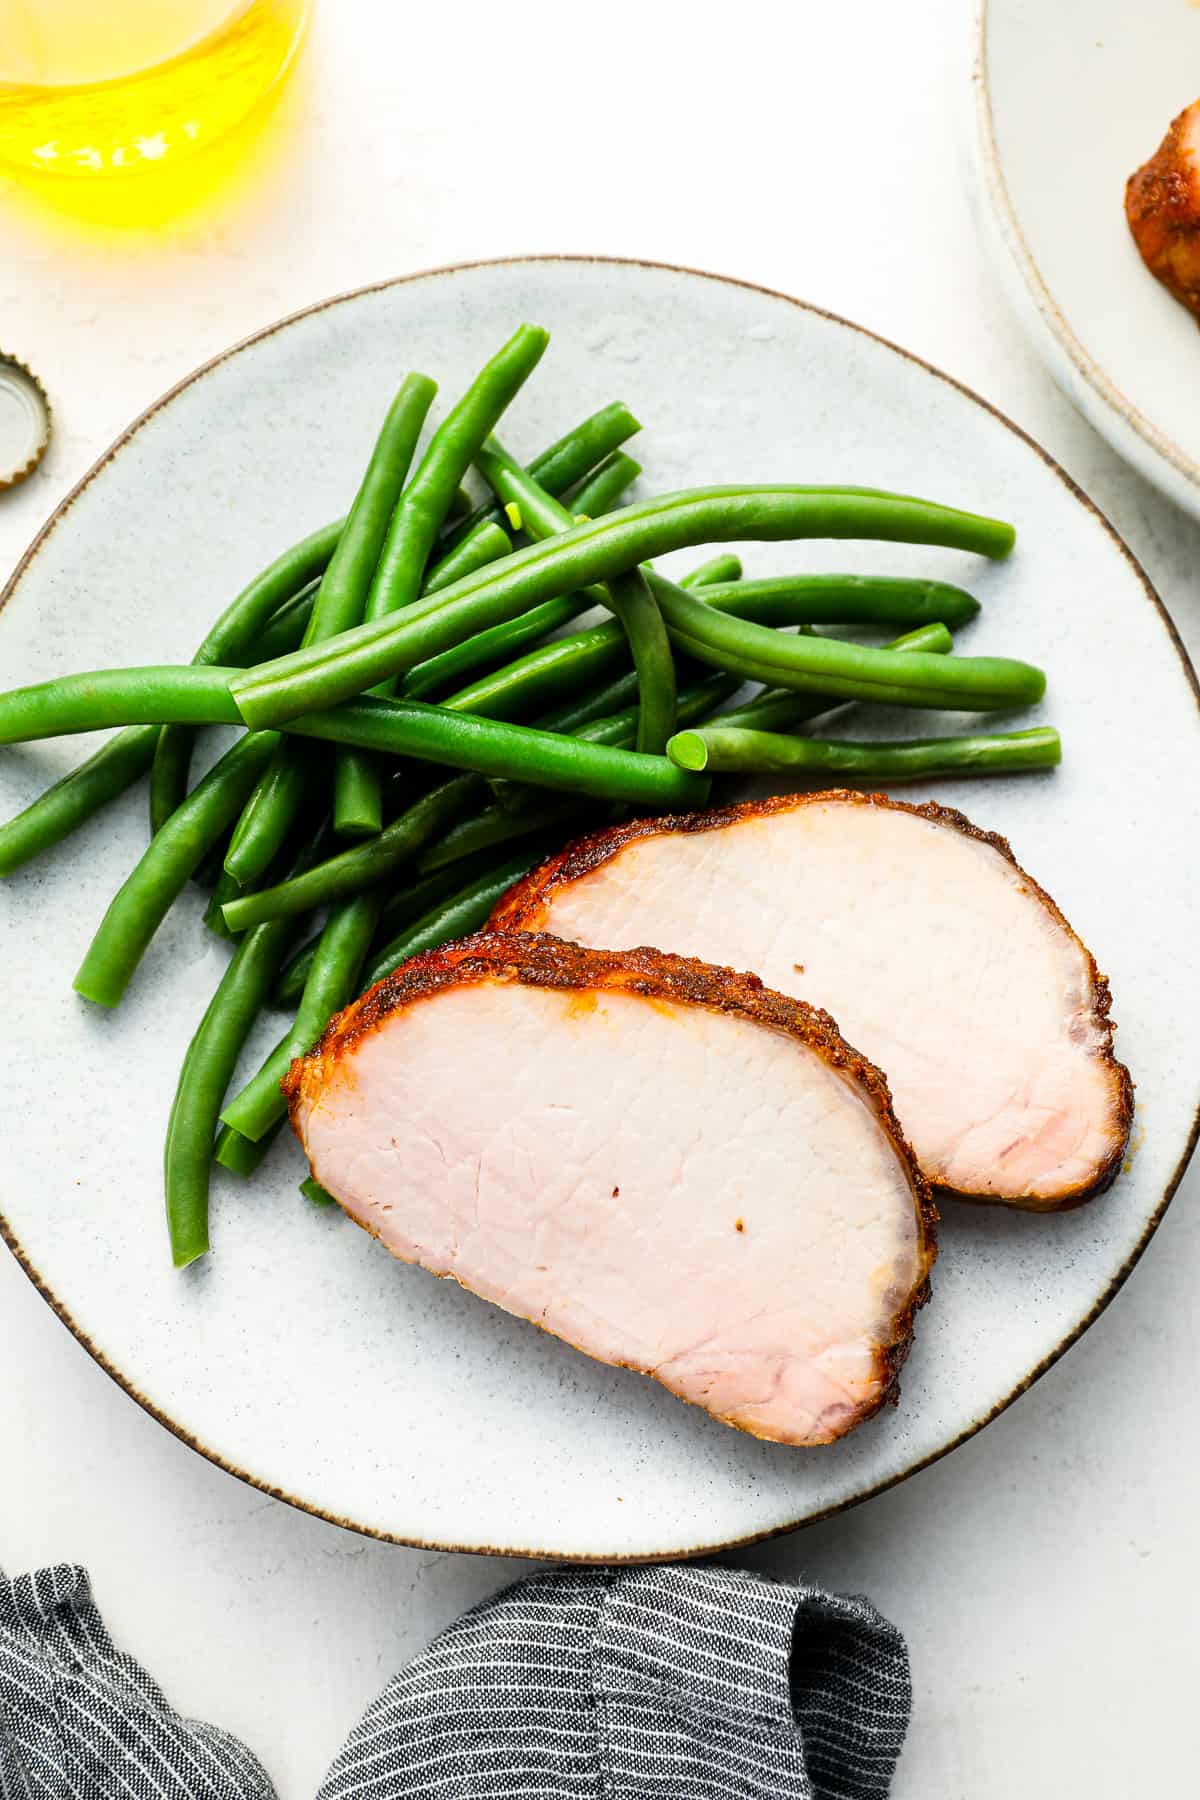 overhead view of 2 slices of smoked pork loin on a white plate with green beans.